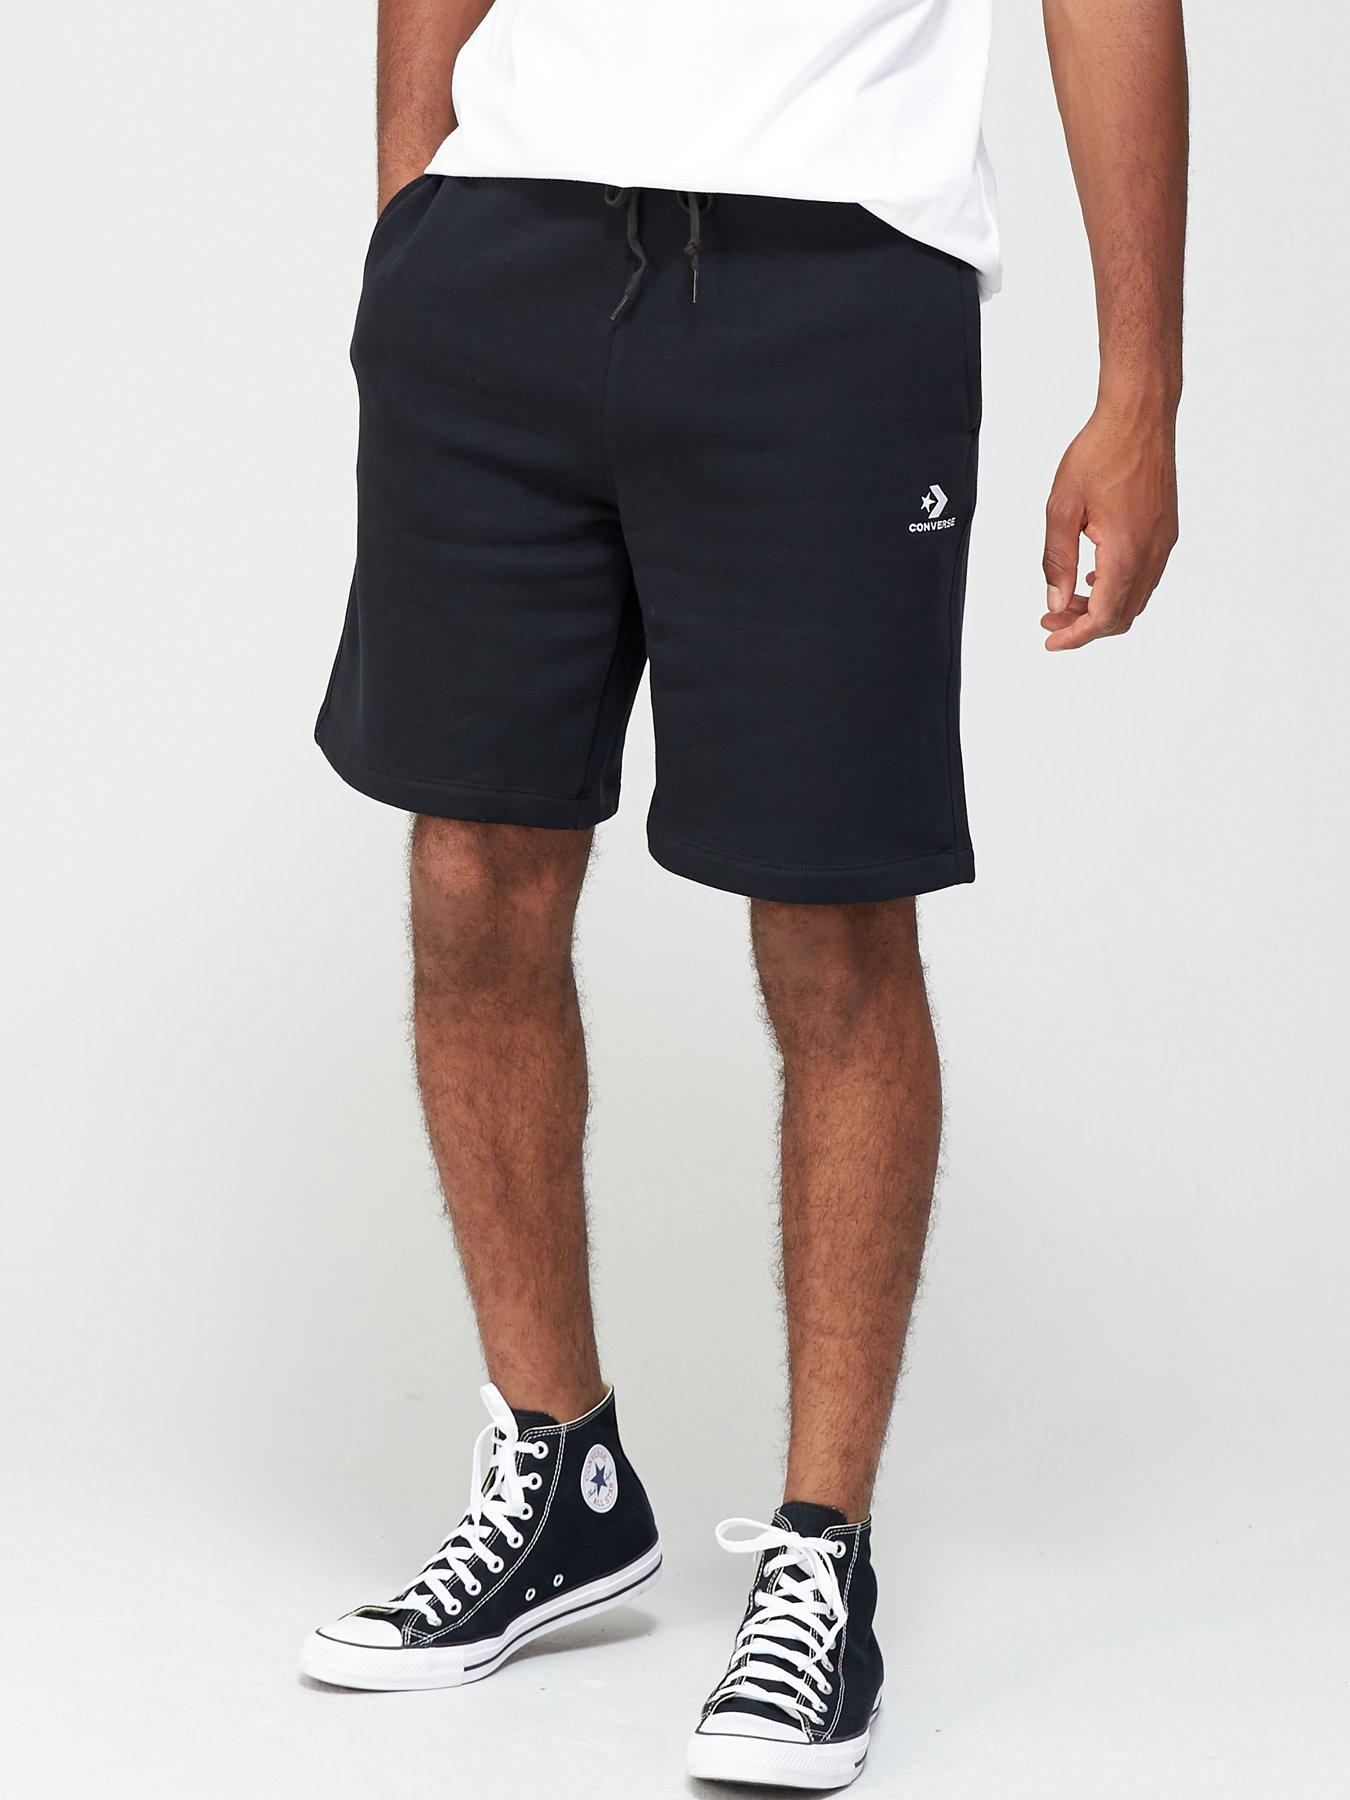 black converse with shorts